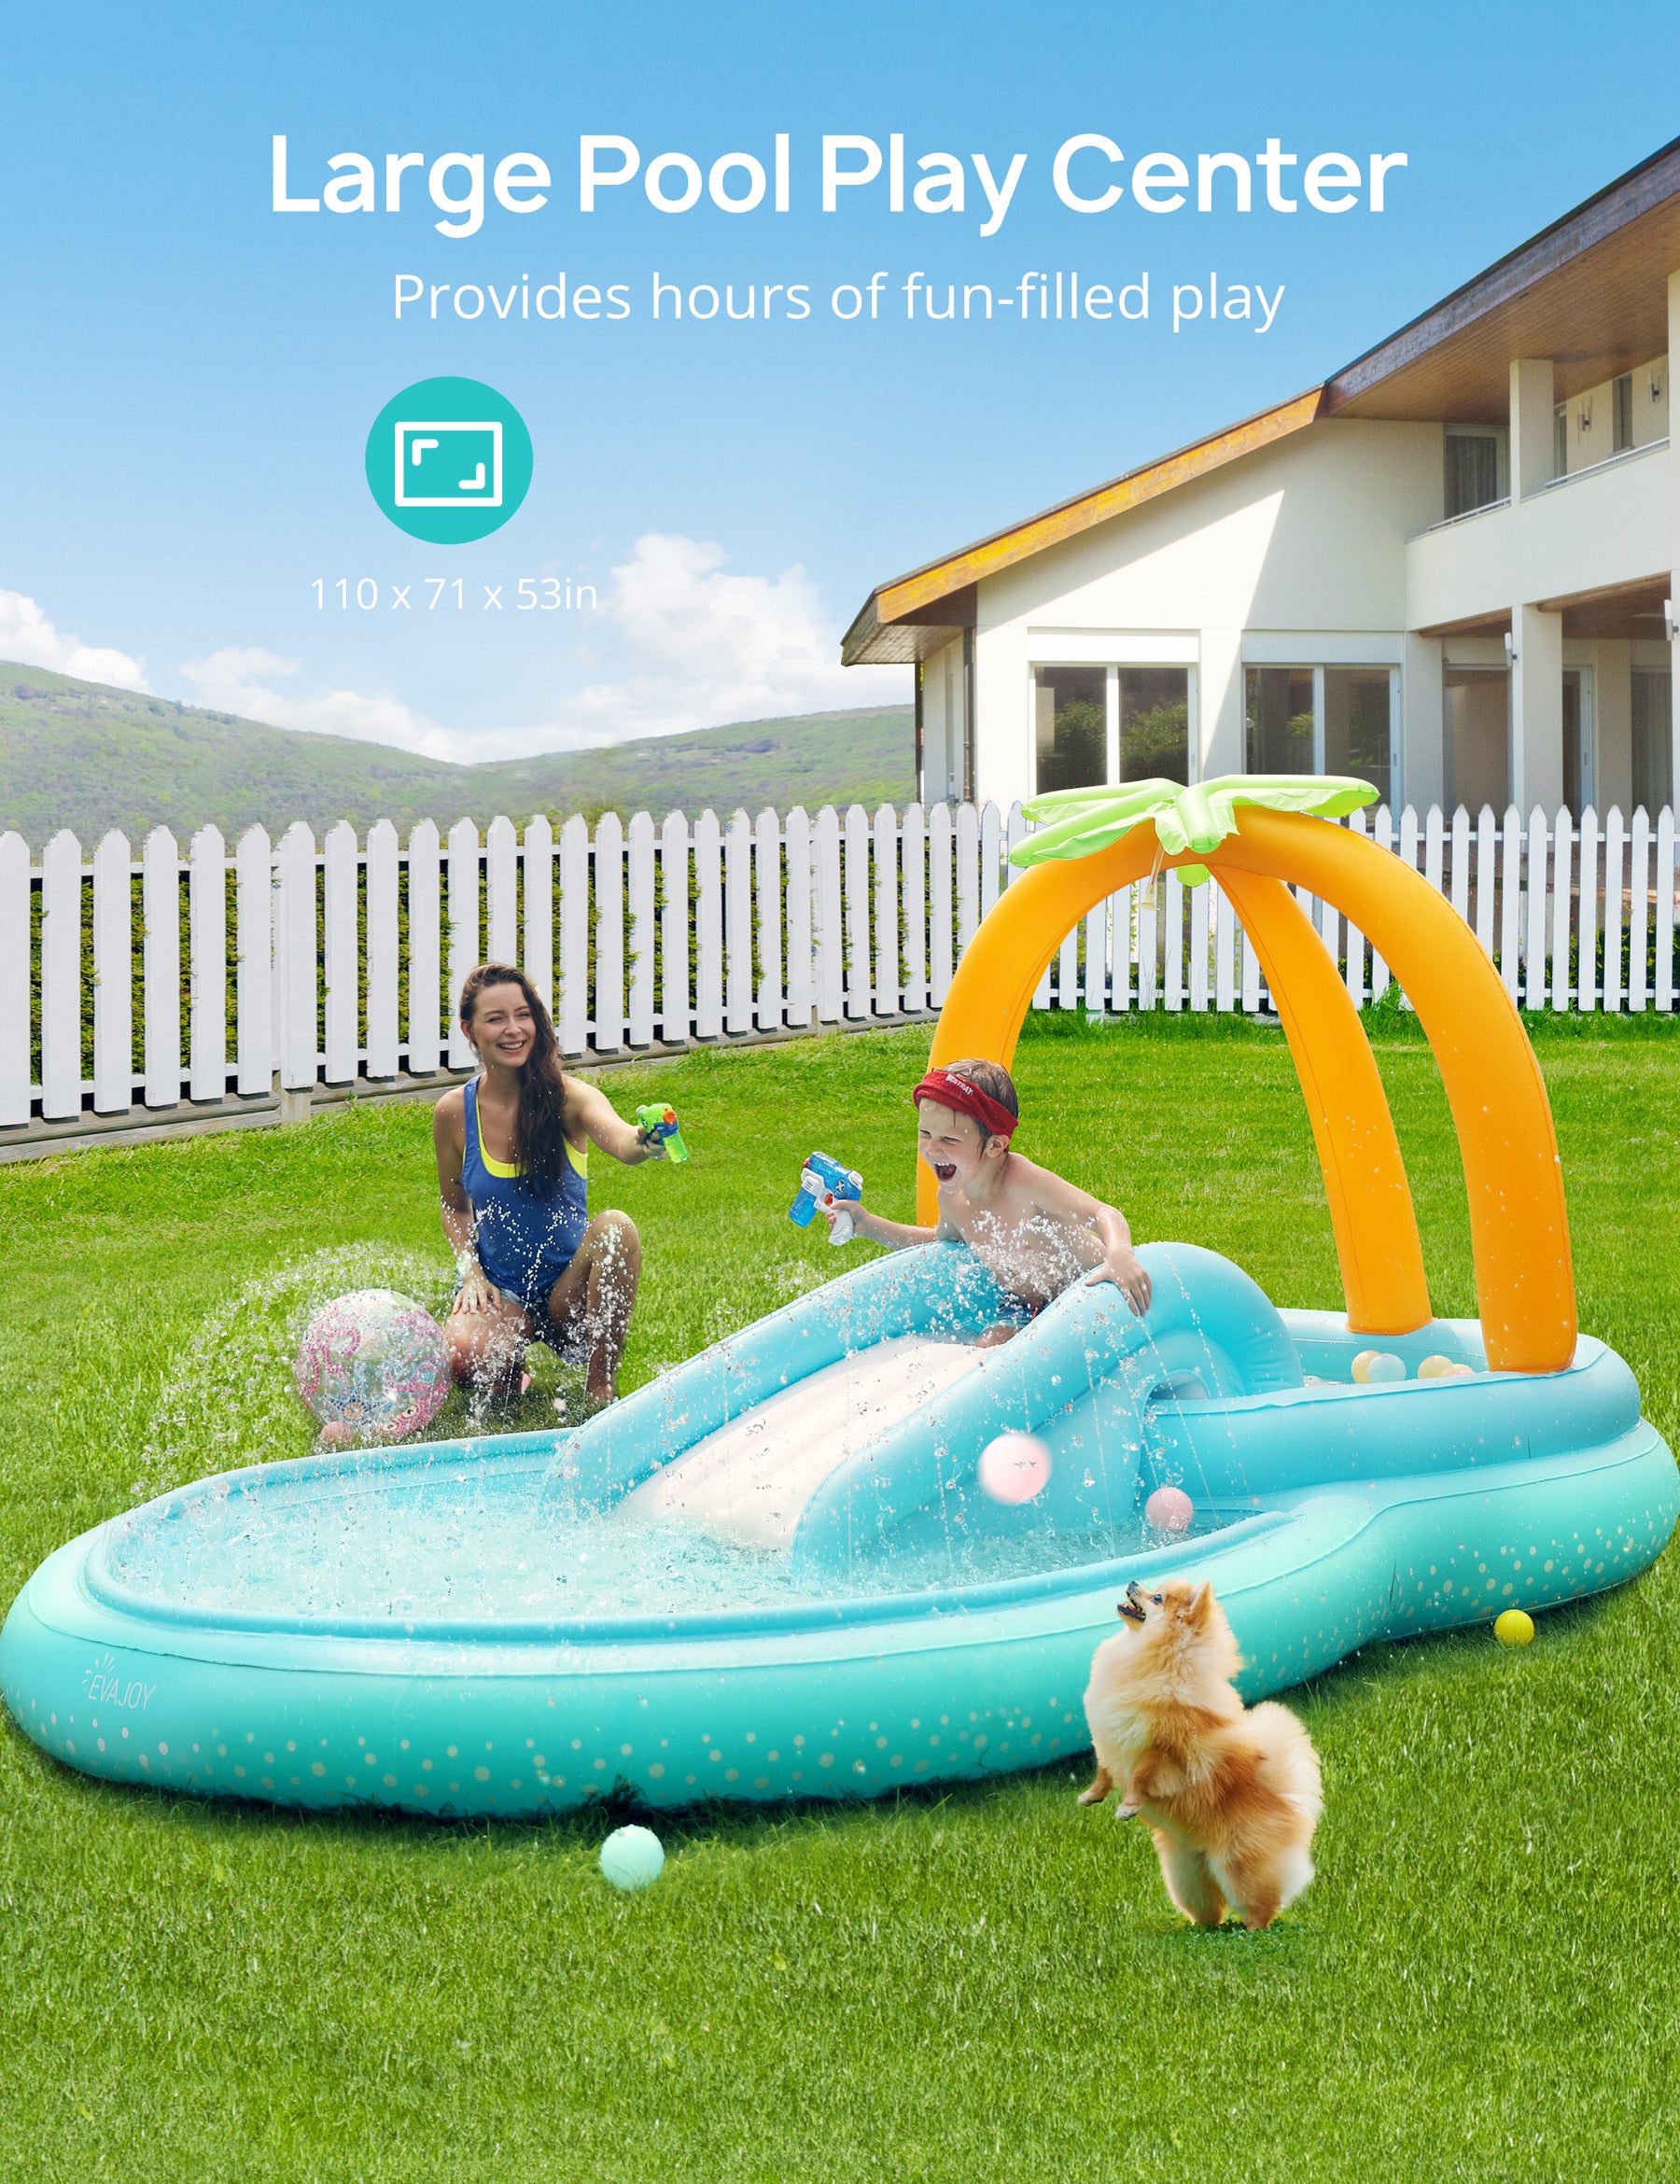 Slide And Fun, Level 1 Activity Toy